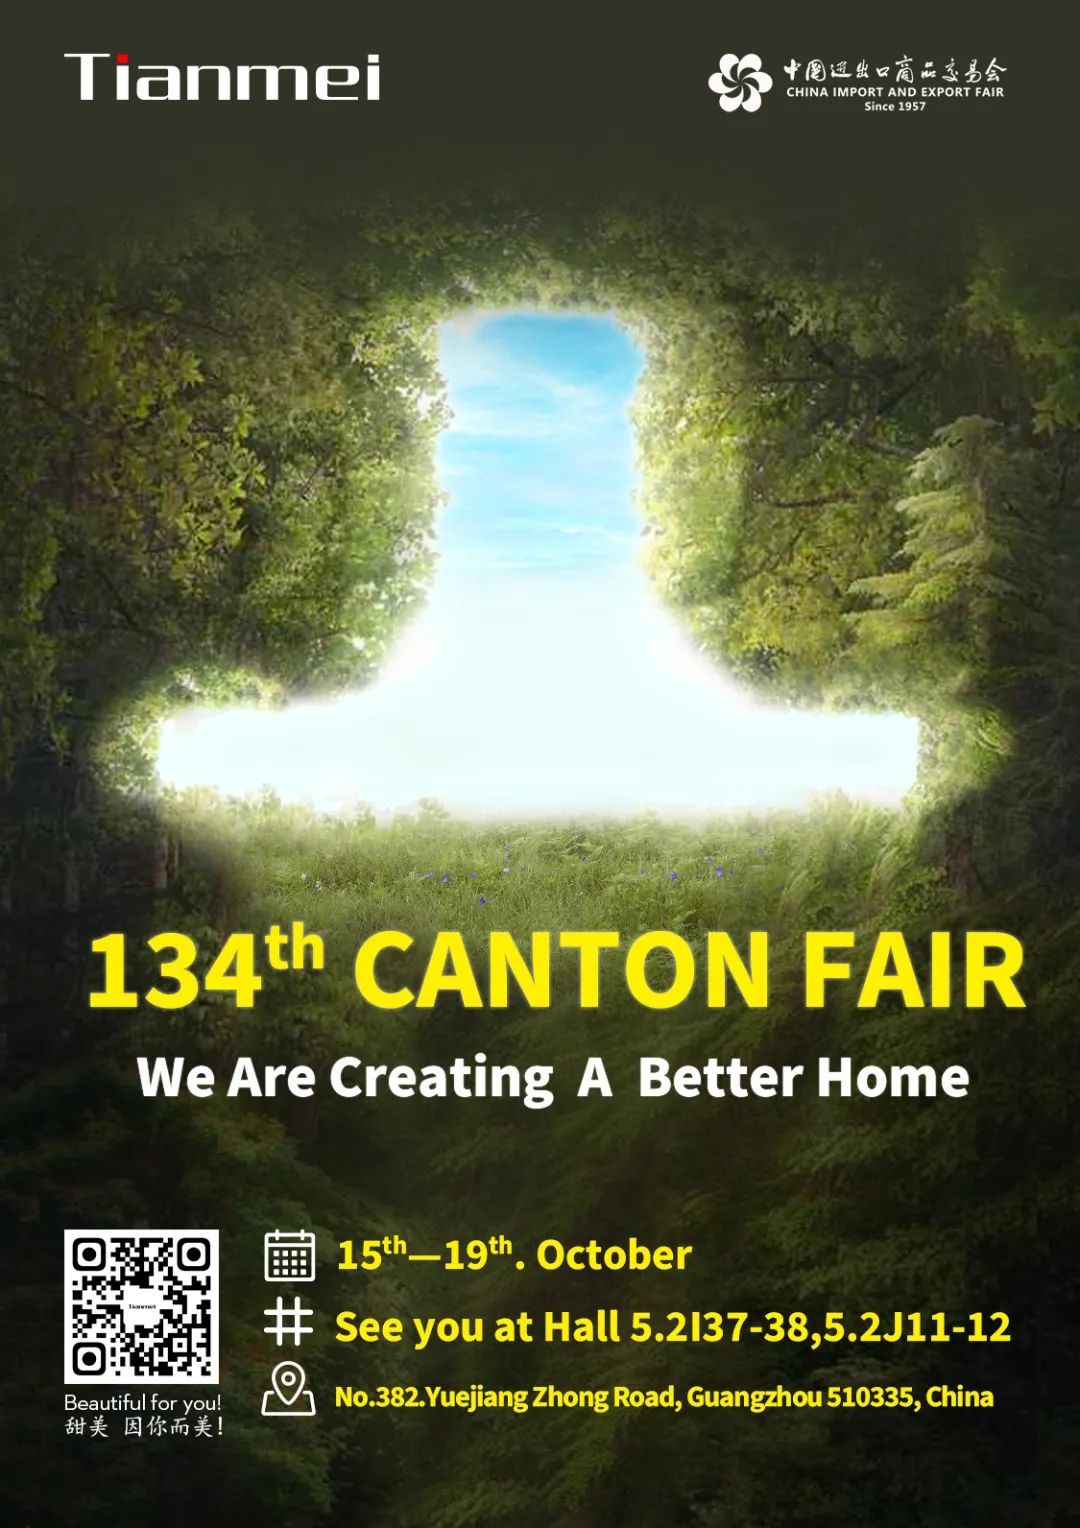 【Tianmei ●Great News】Tianmei see you at the 134th Canton Fair!